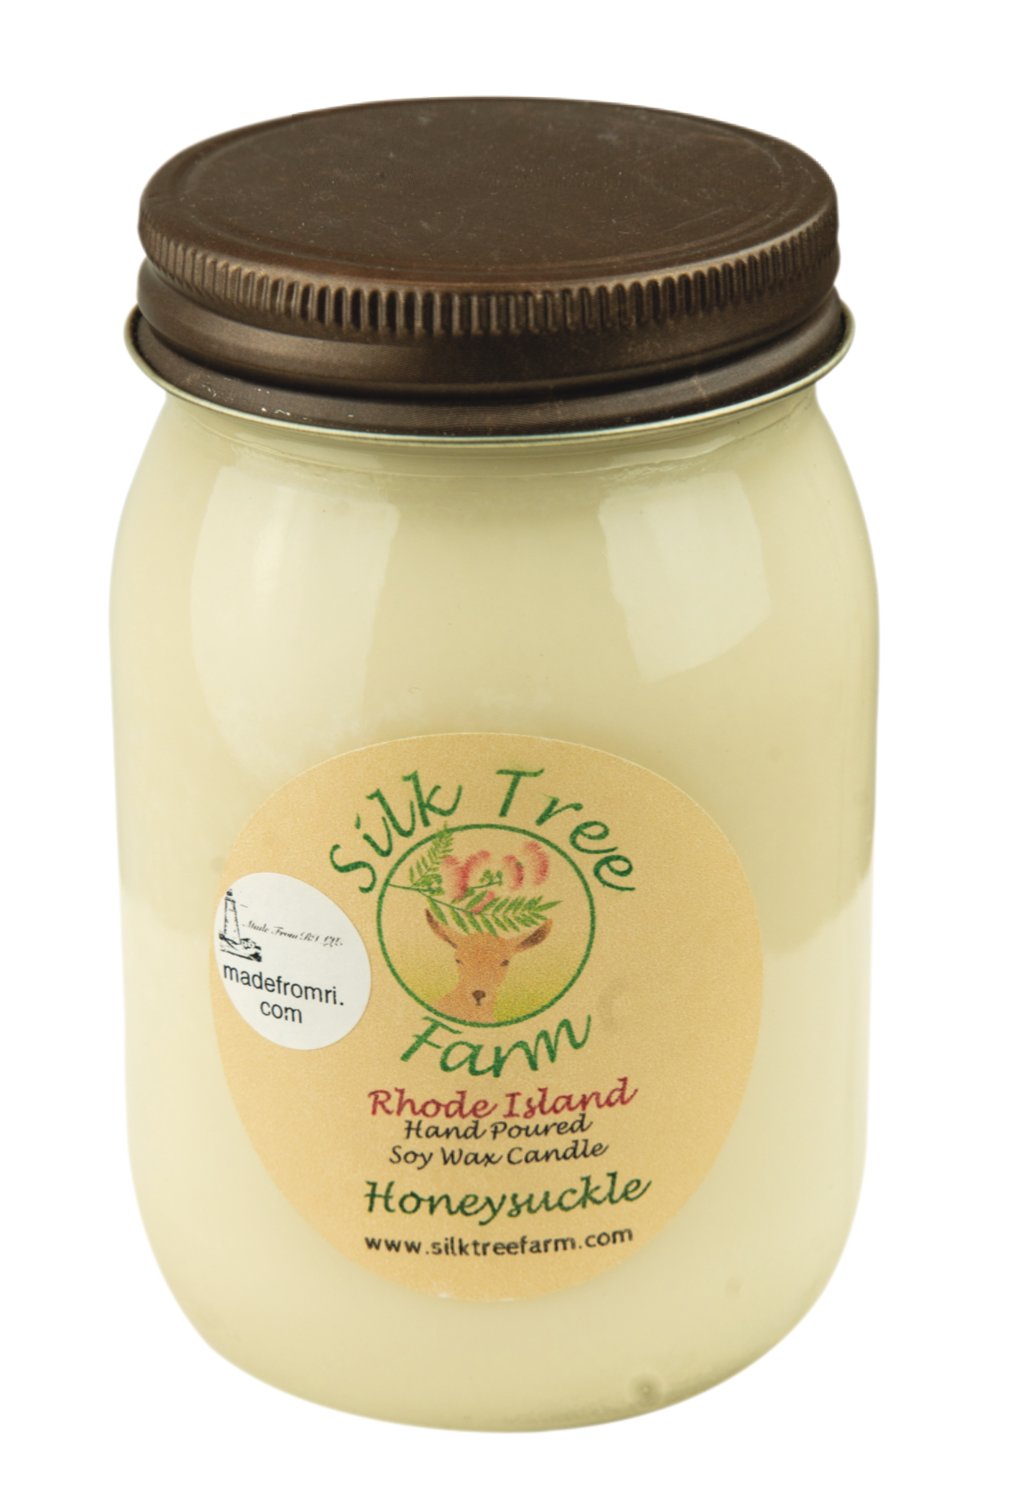 Made From RI: Soy candles with cotton wicks poured to last up to 80 hours. 16 oz, $21.95.